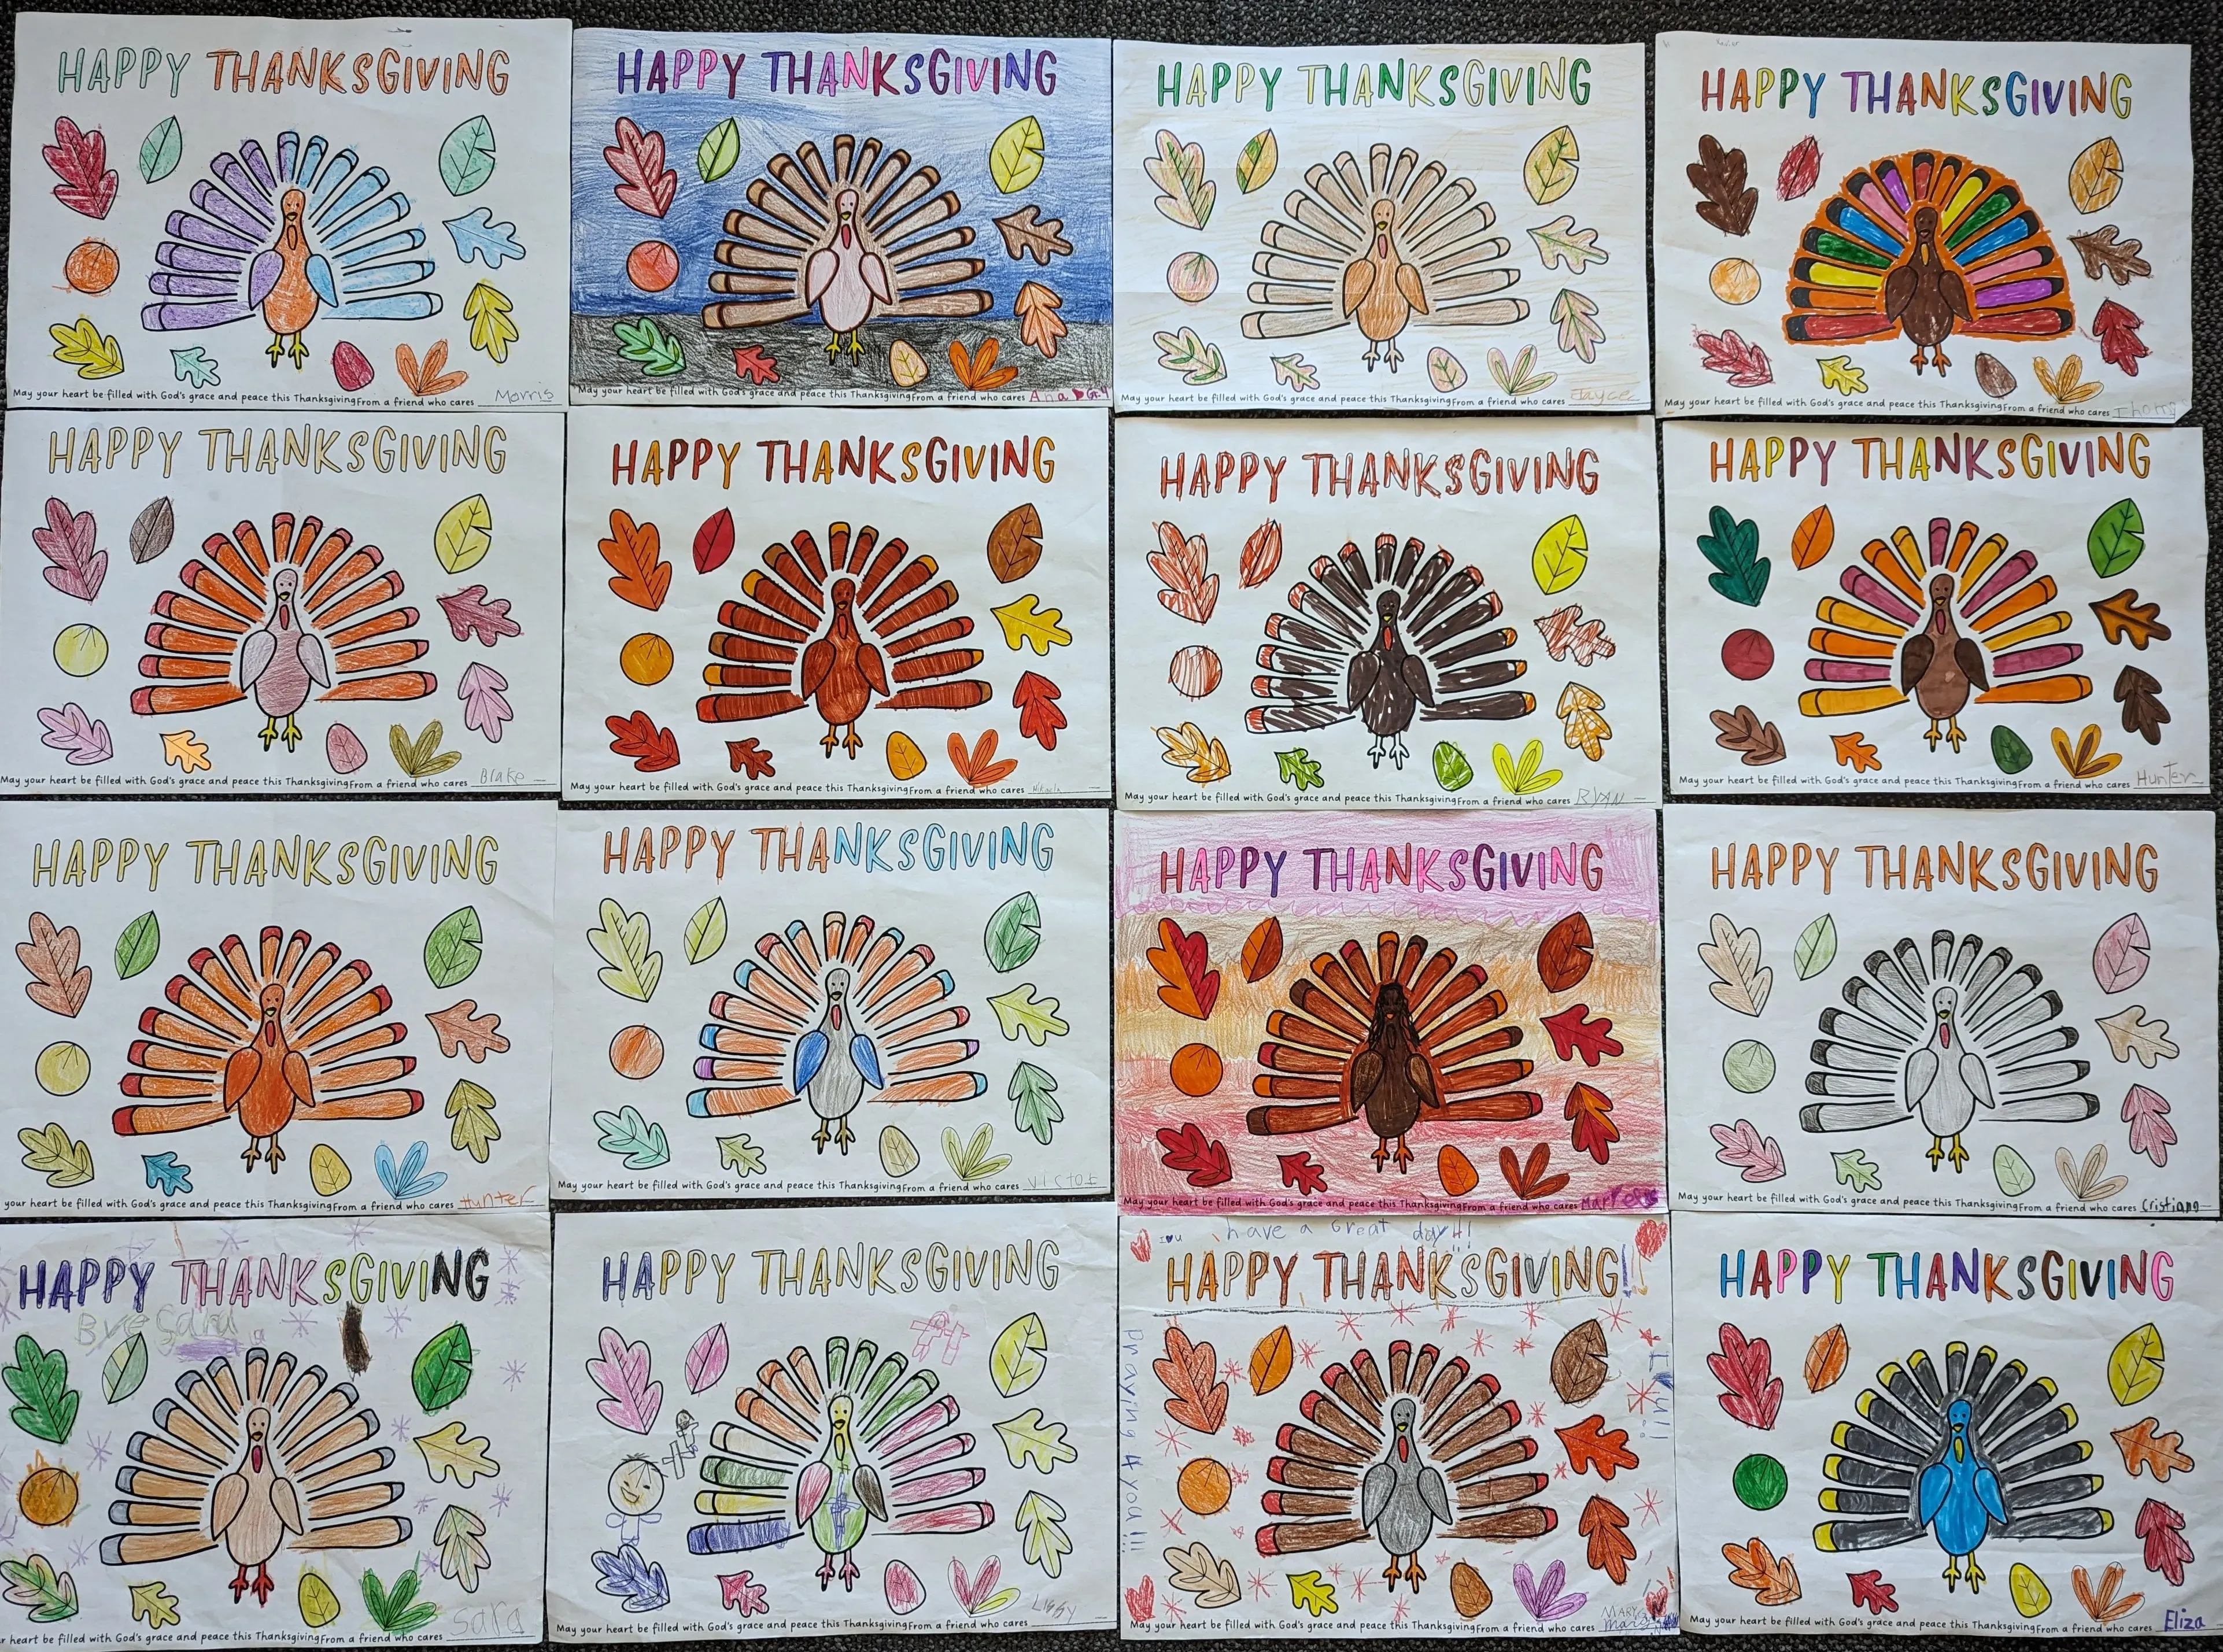 Thanksgiving placemat drawings